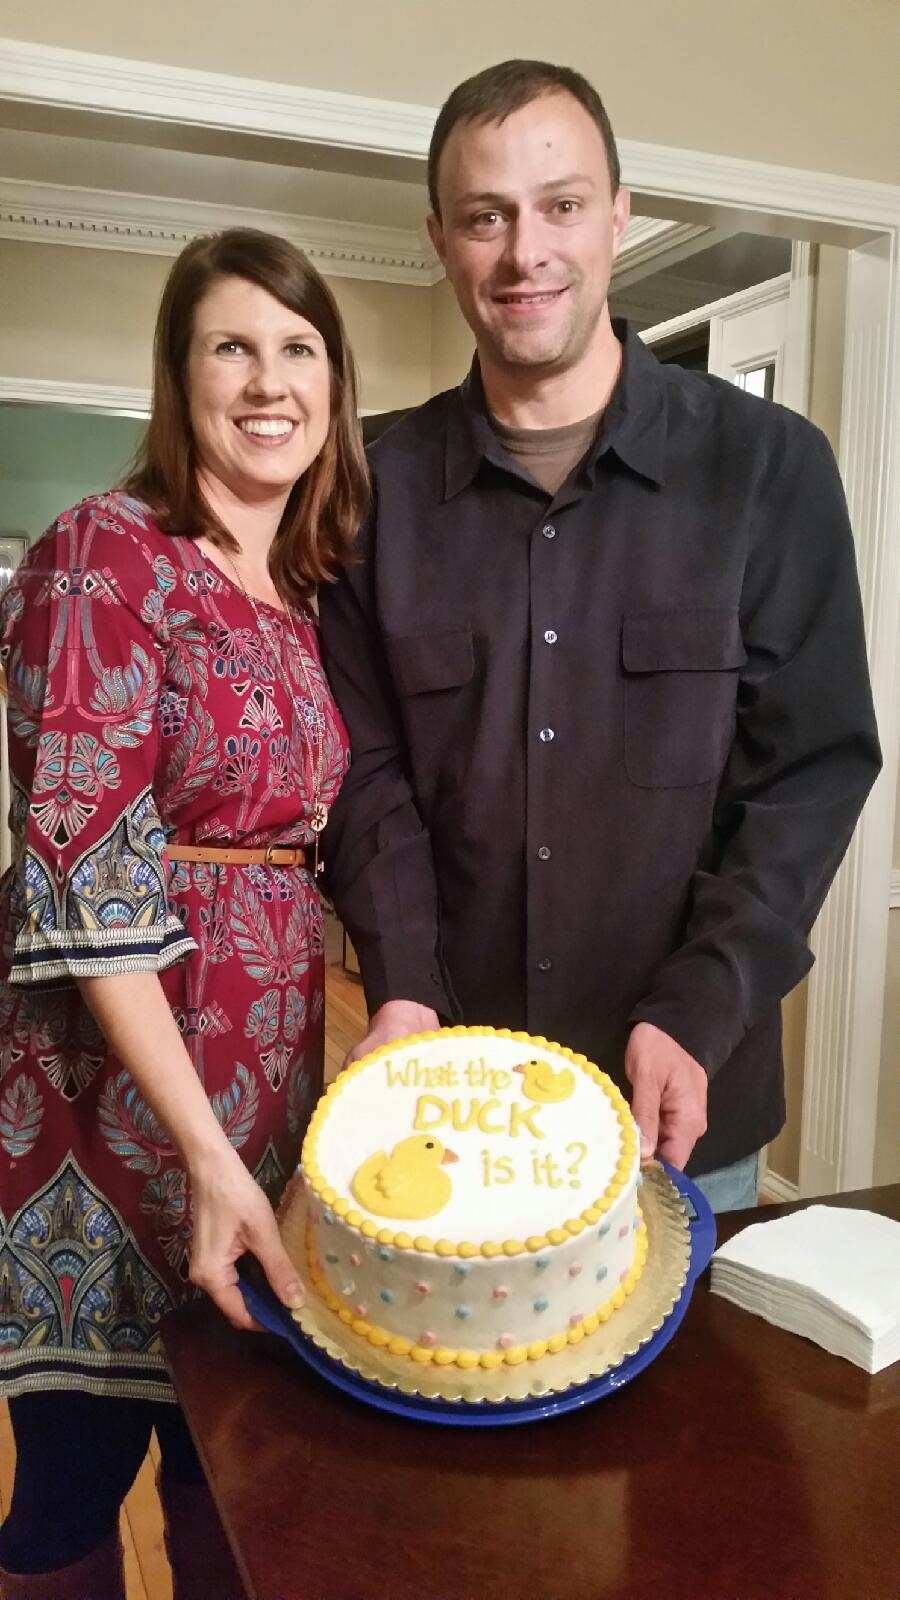 Man and woman stand holding a cake with a duck on it.